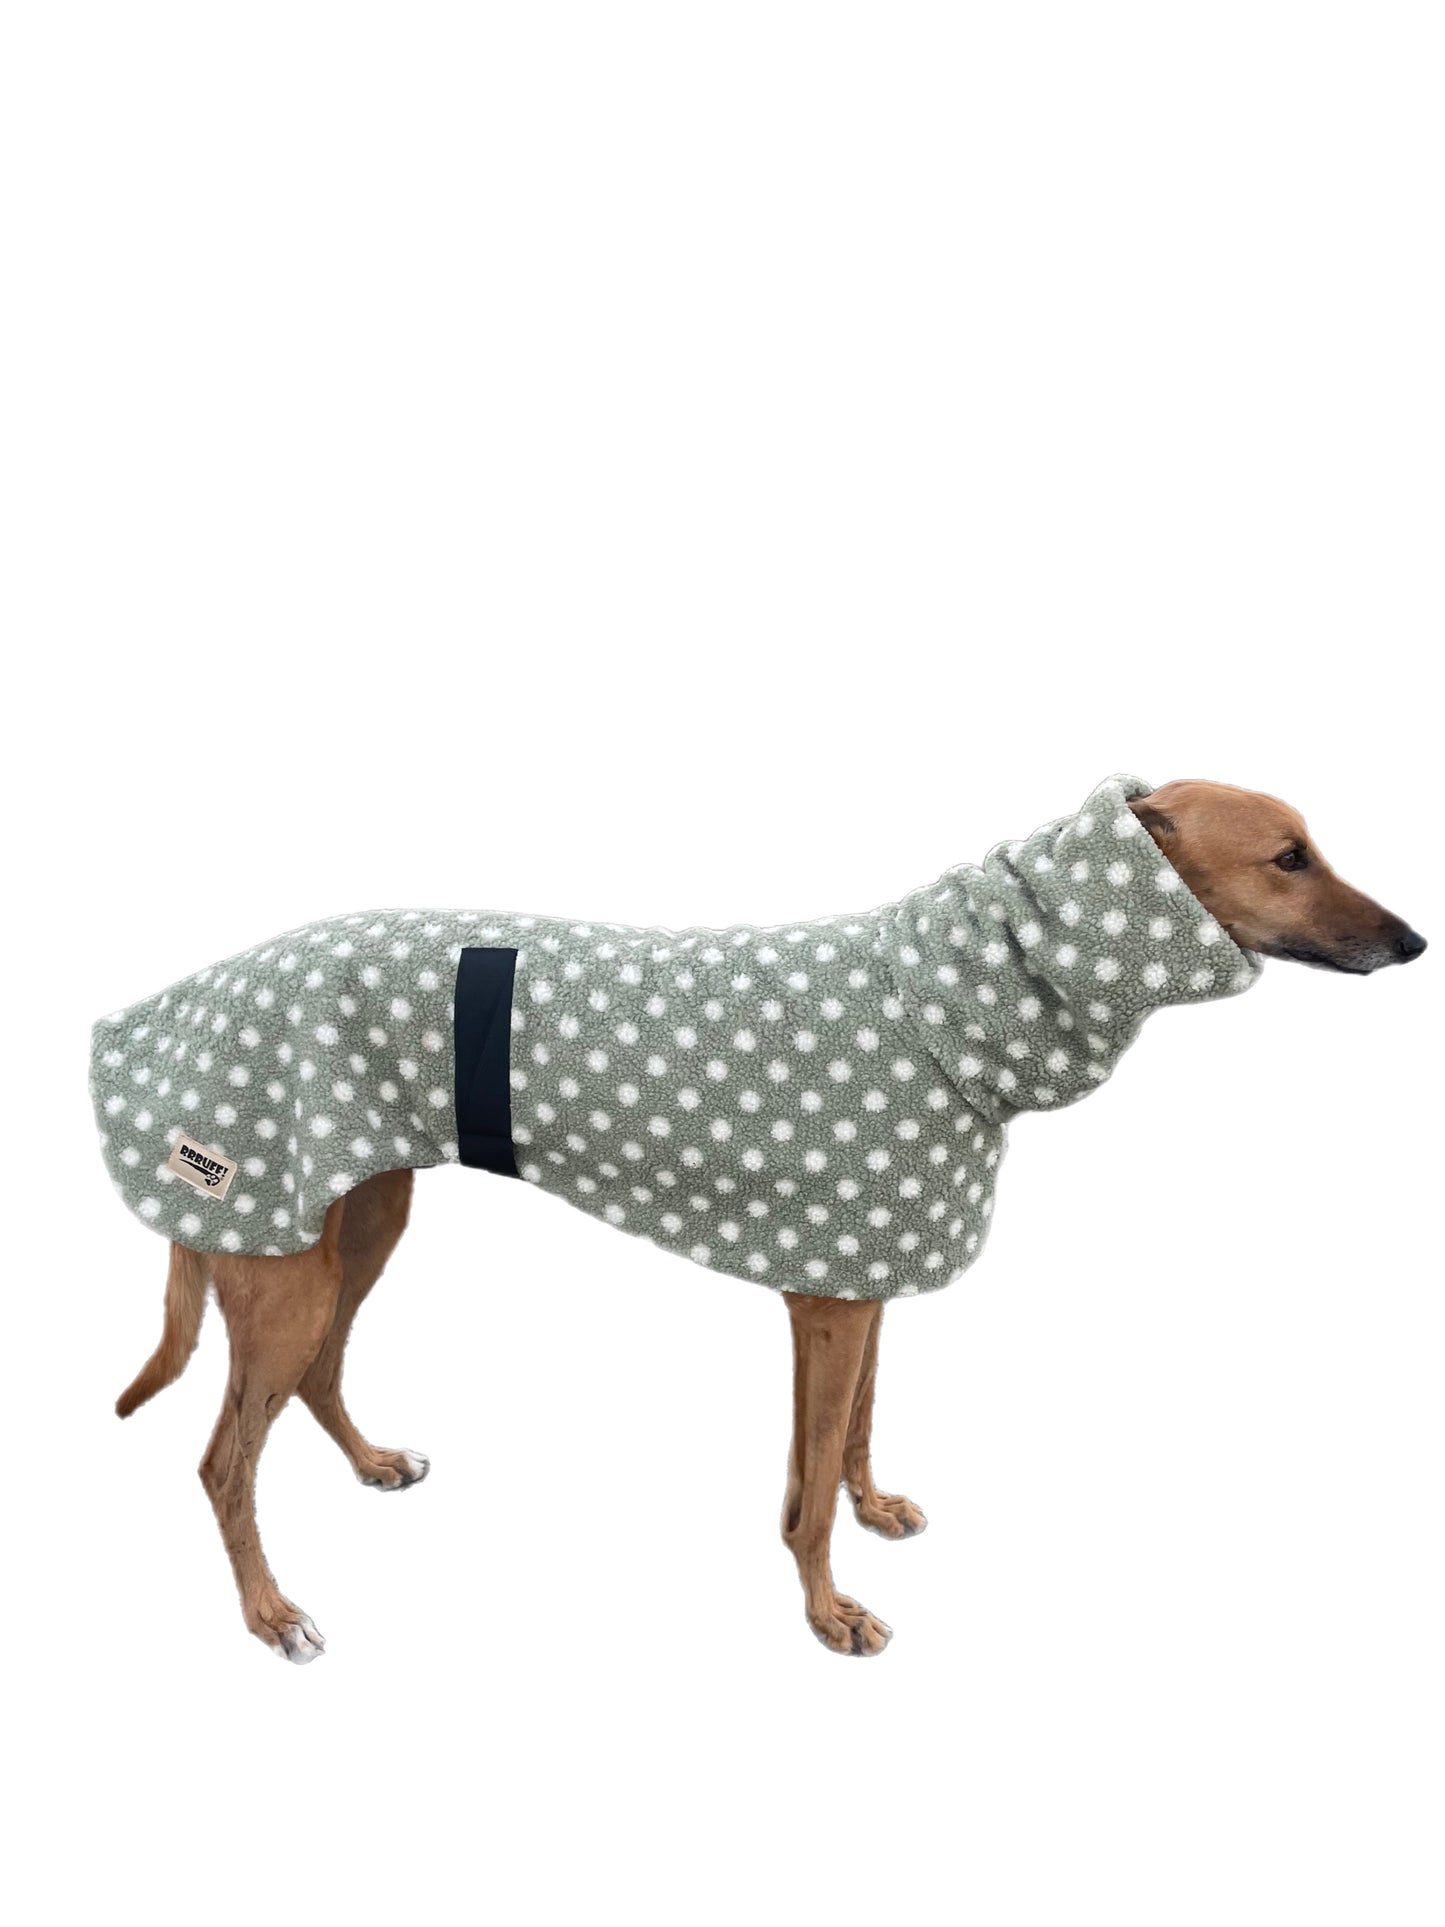 Sage Polka dot print Teddy fleece deluxe style greyhound coat with snuggly wide neck roll